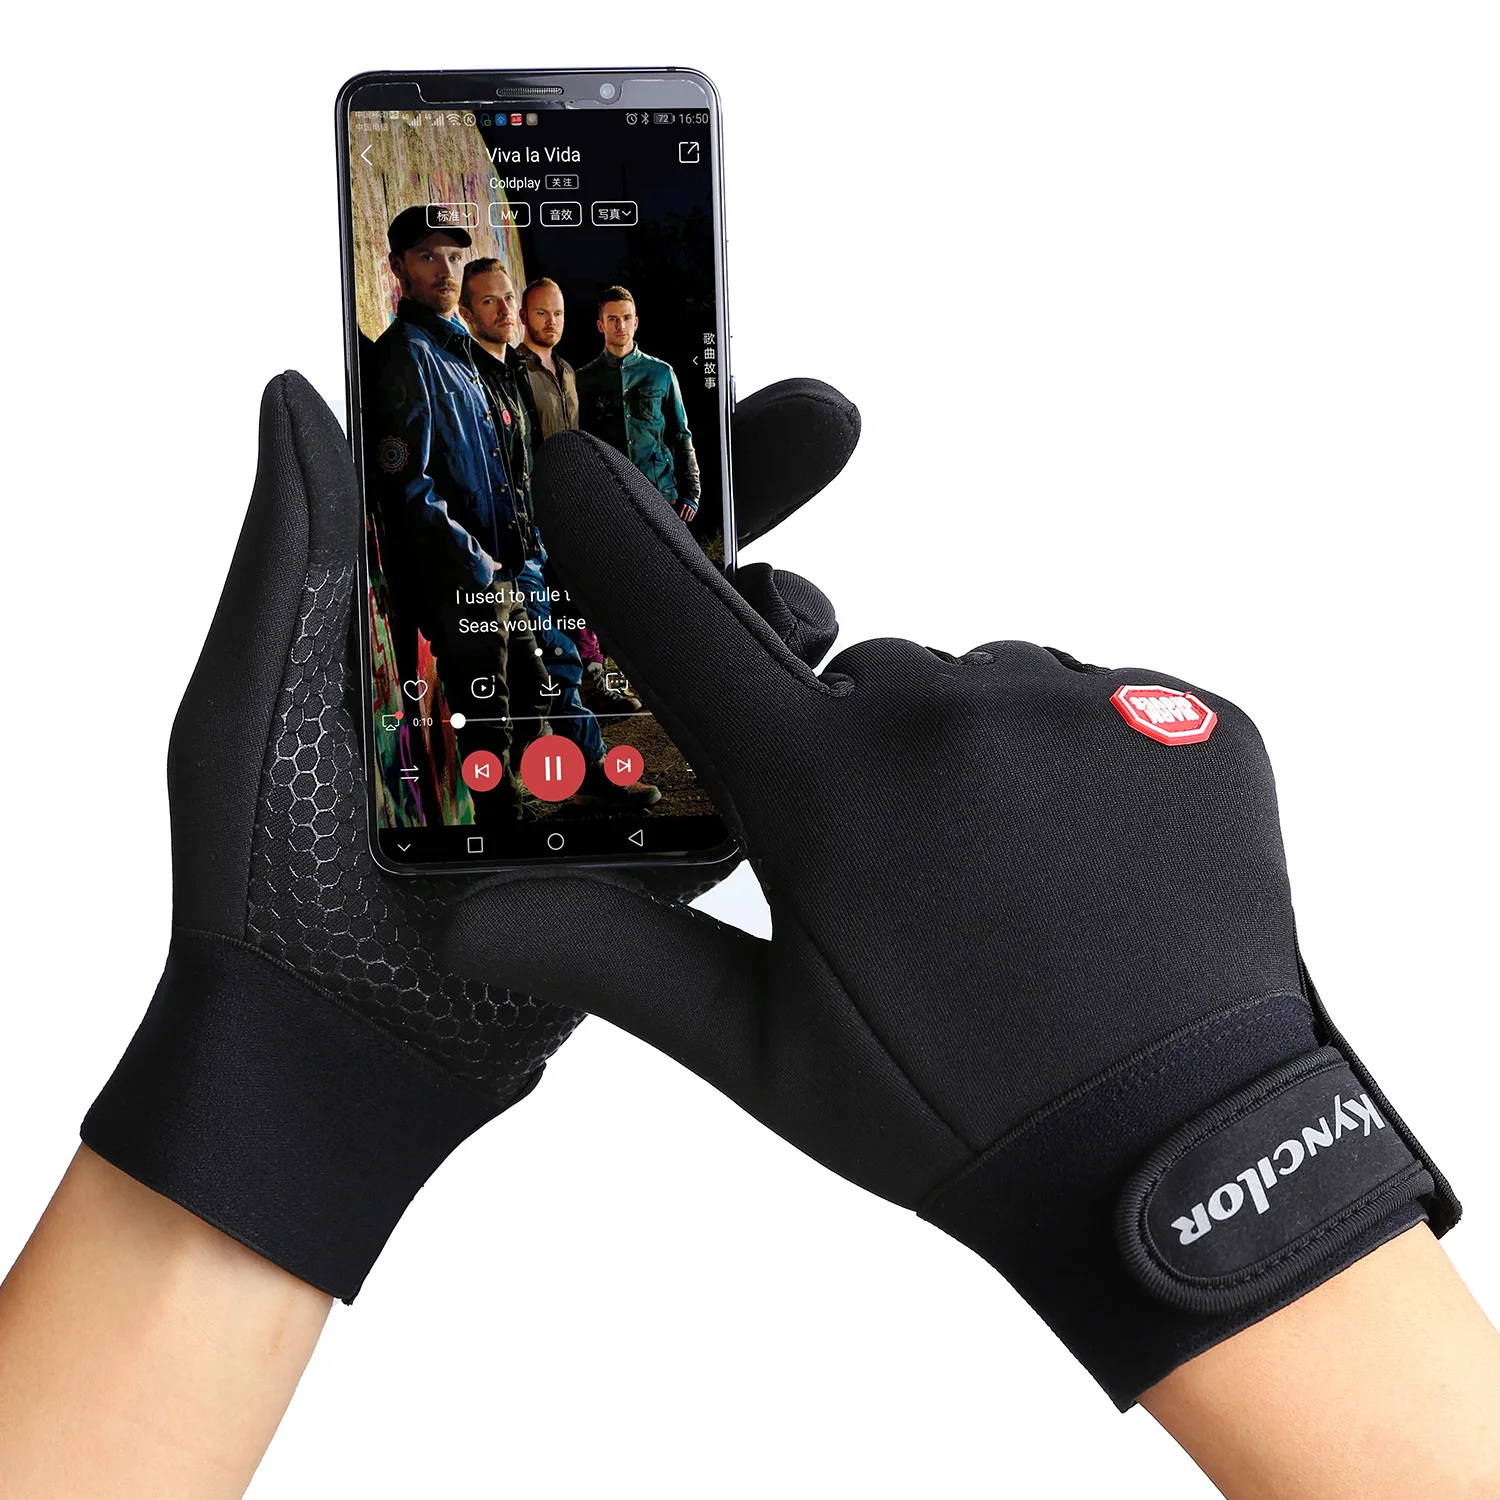 

Autumn Winter Cycling Gloves For Women Men Touch Screen Anti-slip Wear-resistant Warm Breathable Waterproof Skiing Bicycle Glove